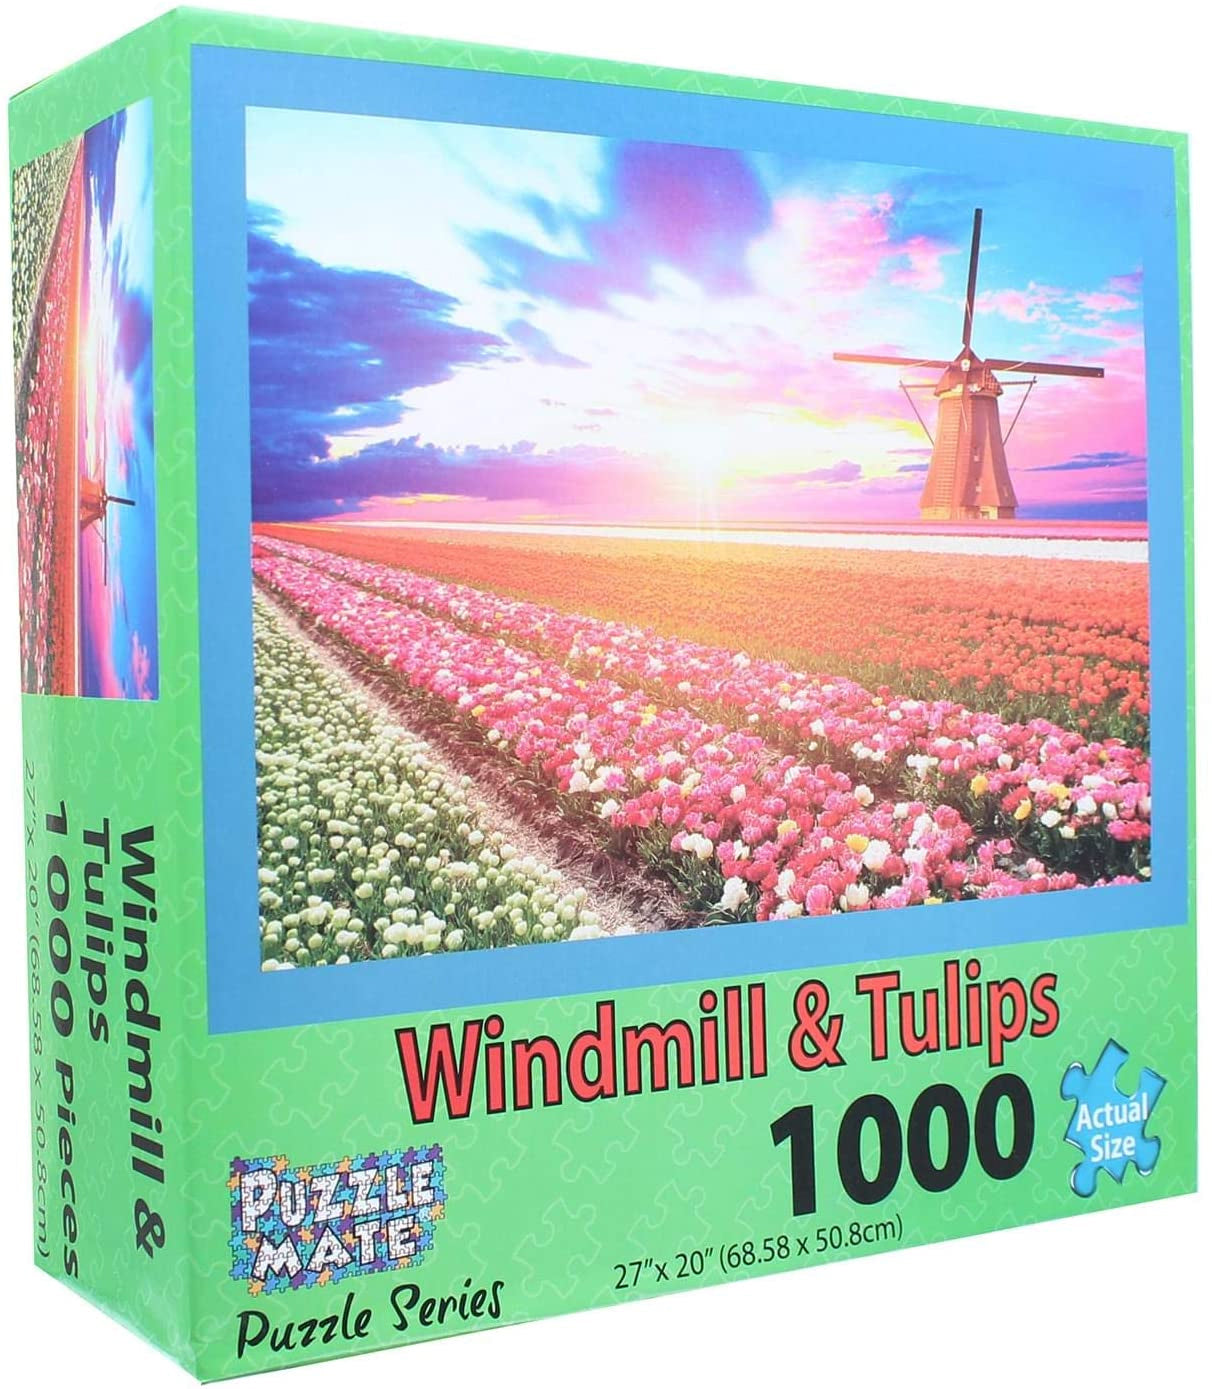 Wisconsin Toy Co. Puzzle Mate 1000 Piece 27'' x 20'' Jigsaw Puzzle